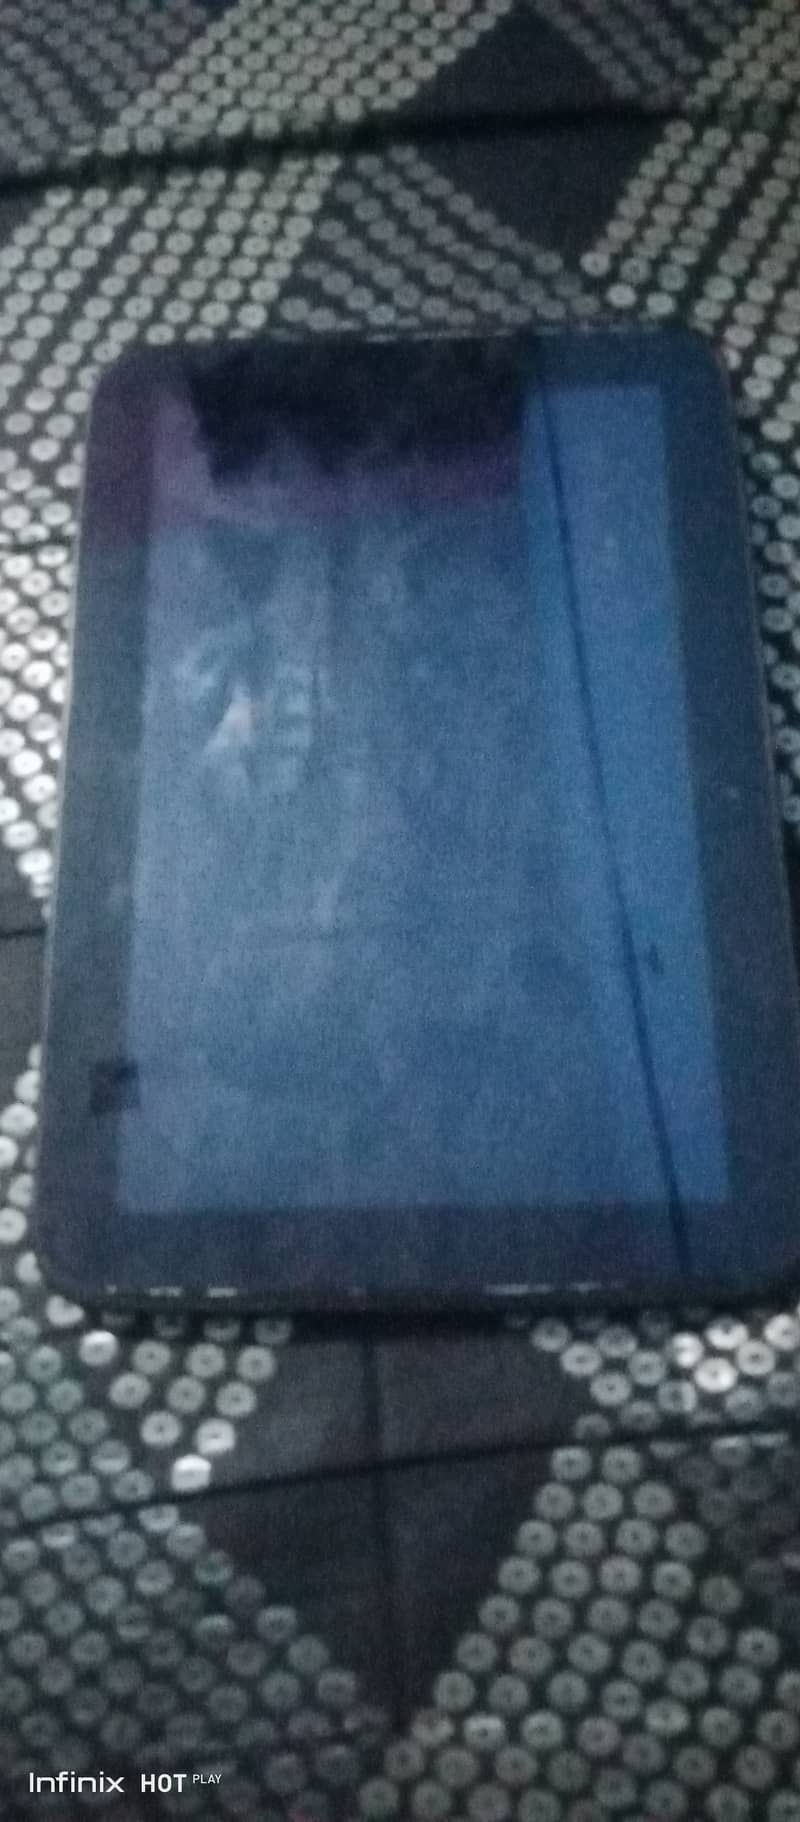 Tablet selling for olx 2